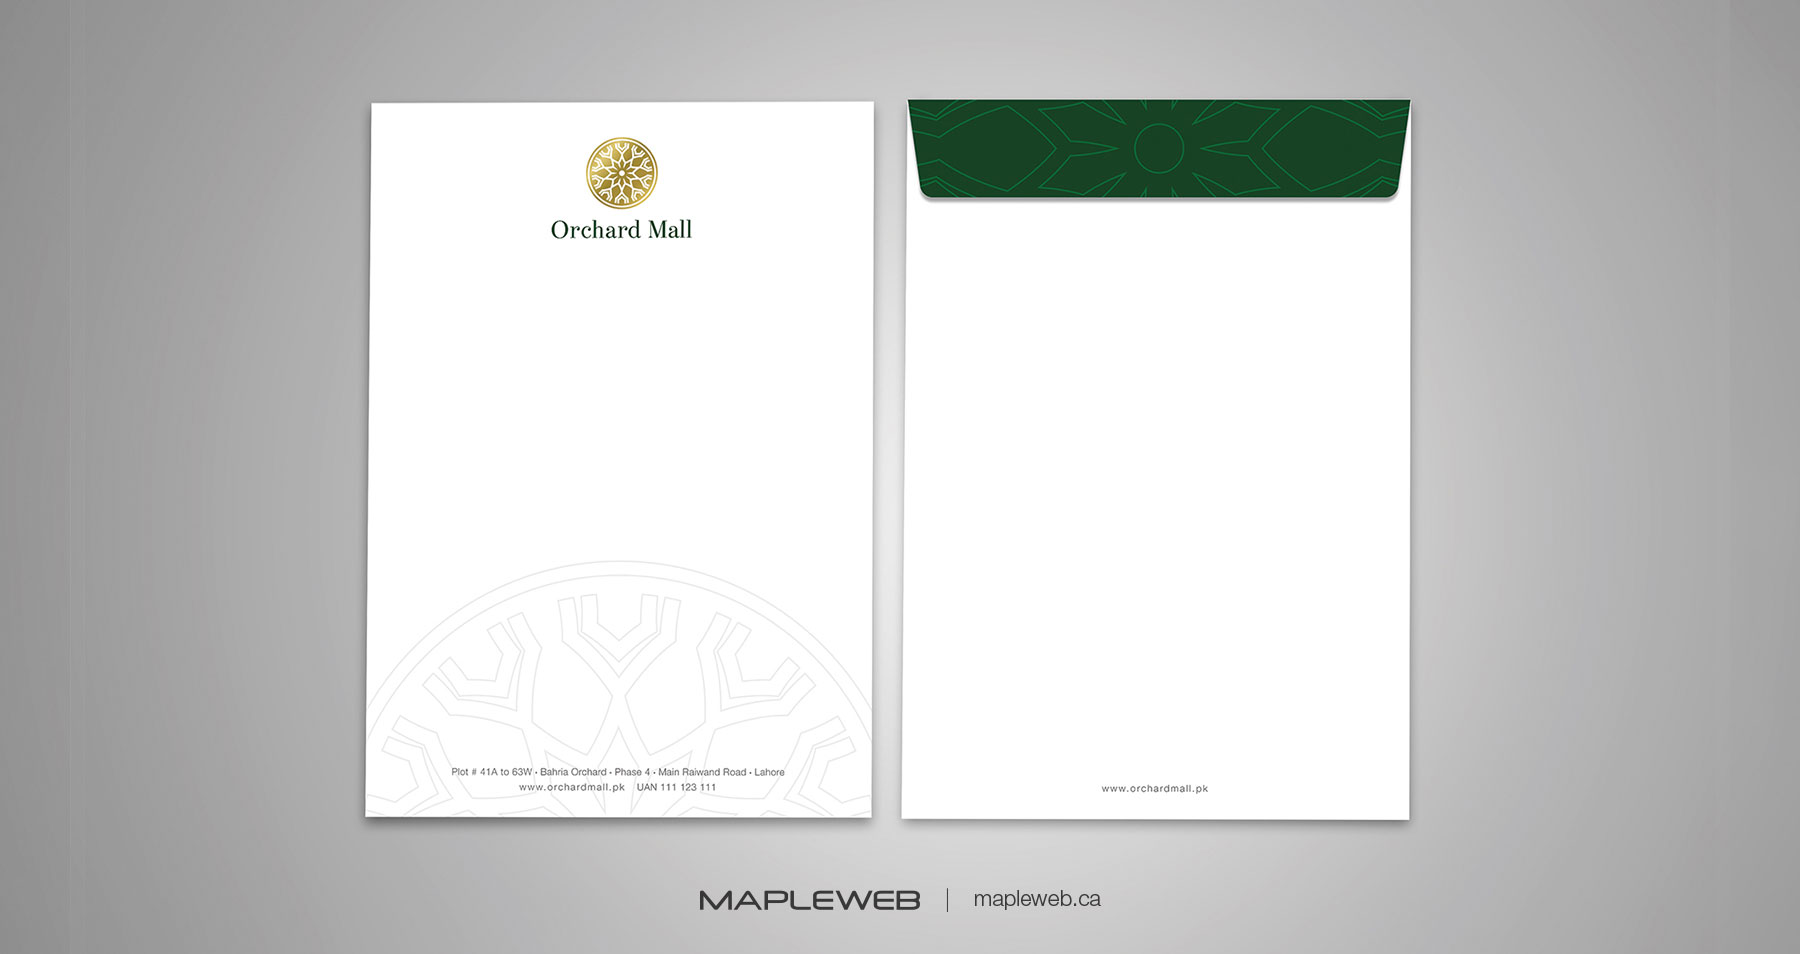 Orchard Mall Envelope Brand design by Mapleweb